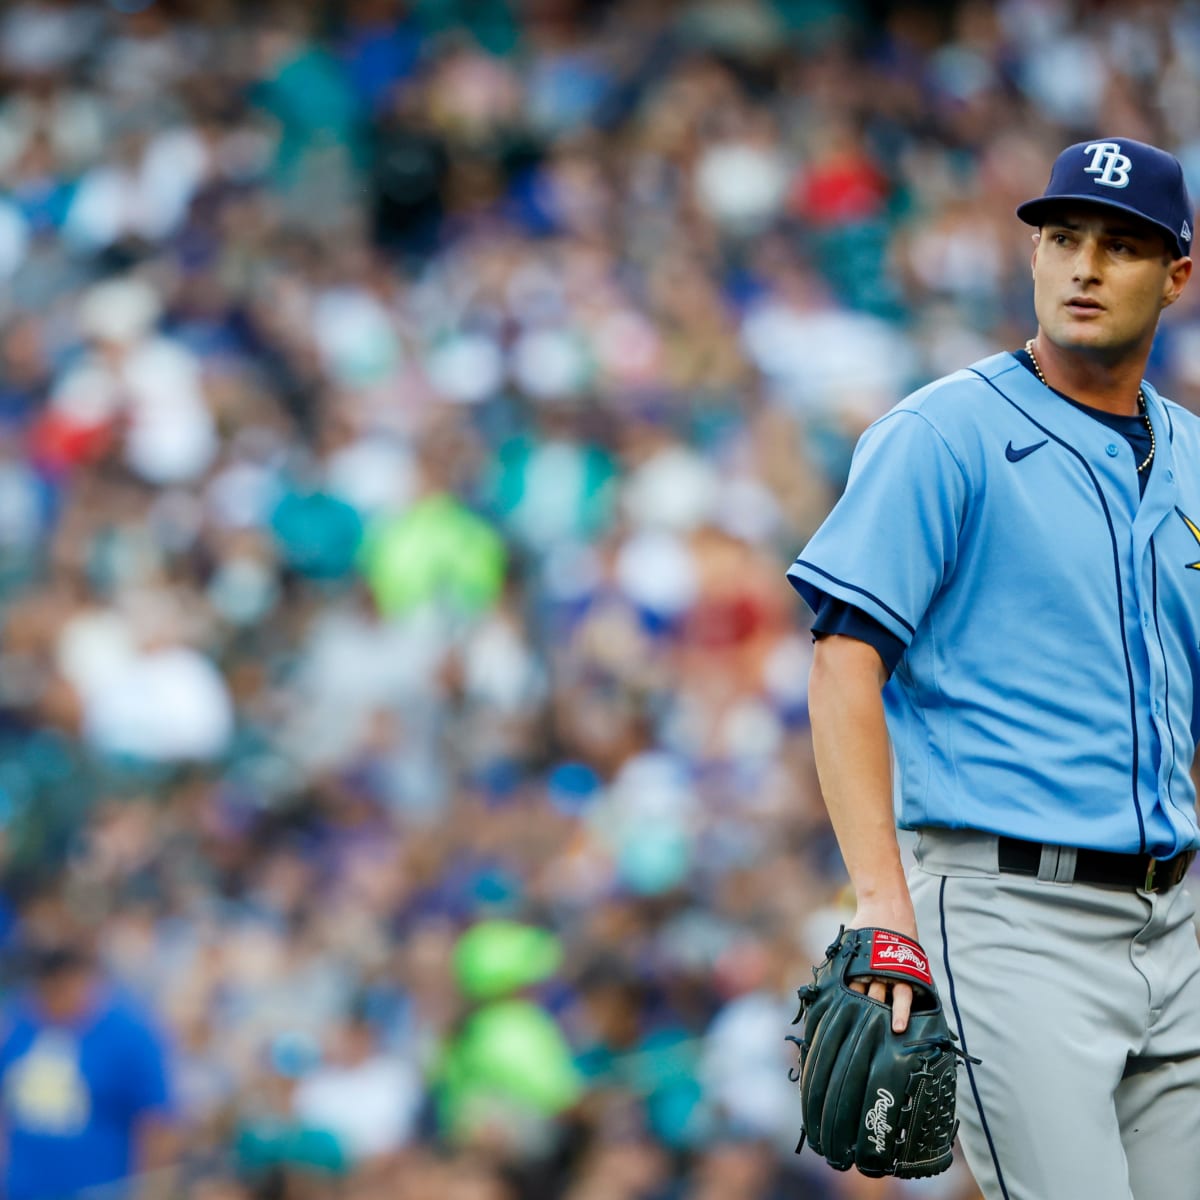 Pitching in Cold Weather a Challenge, But Rays Have Handled it